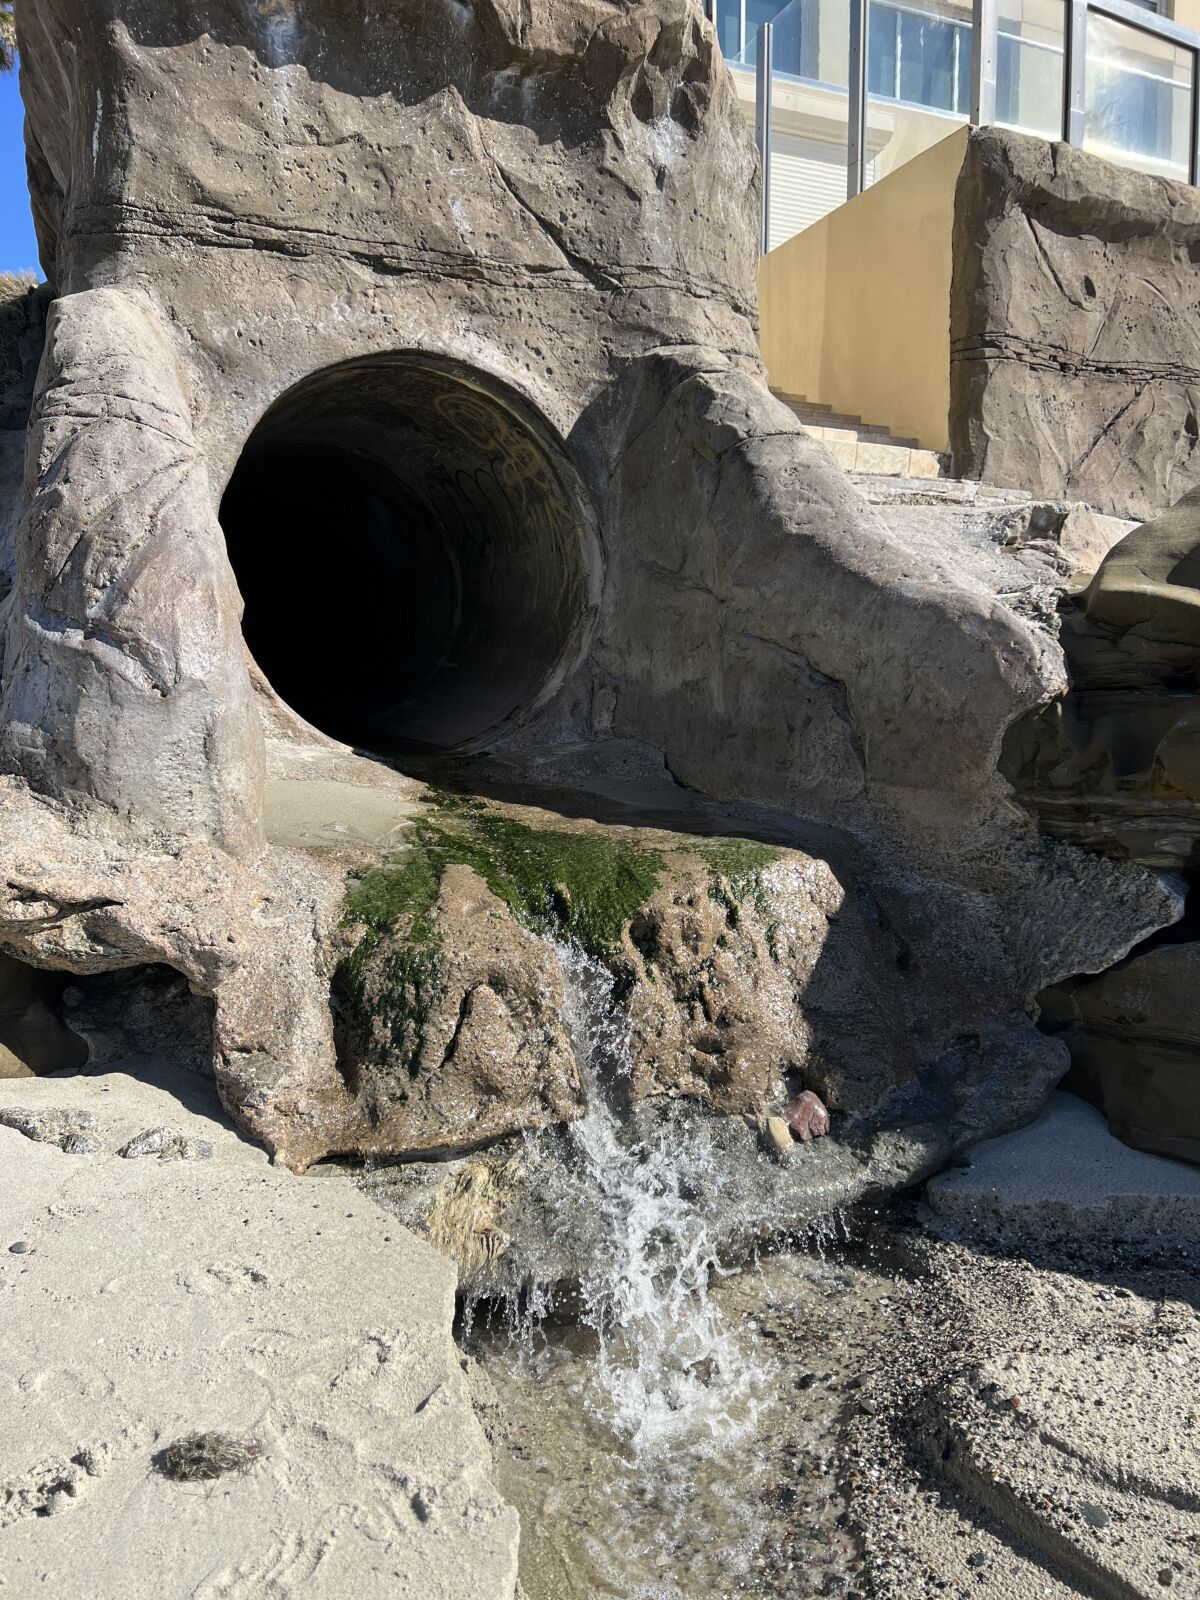 Stormwater washes into the ocean in La Jolla and elsewhere.